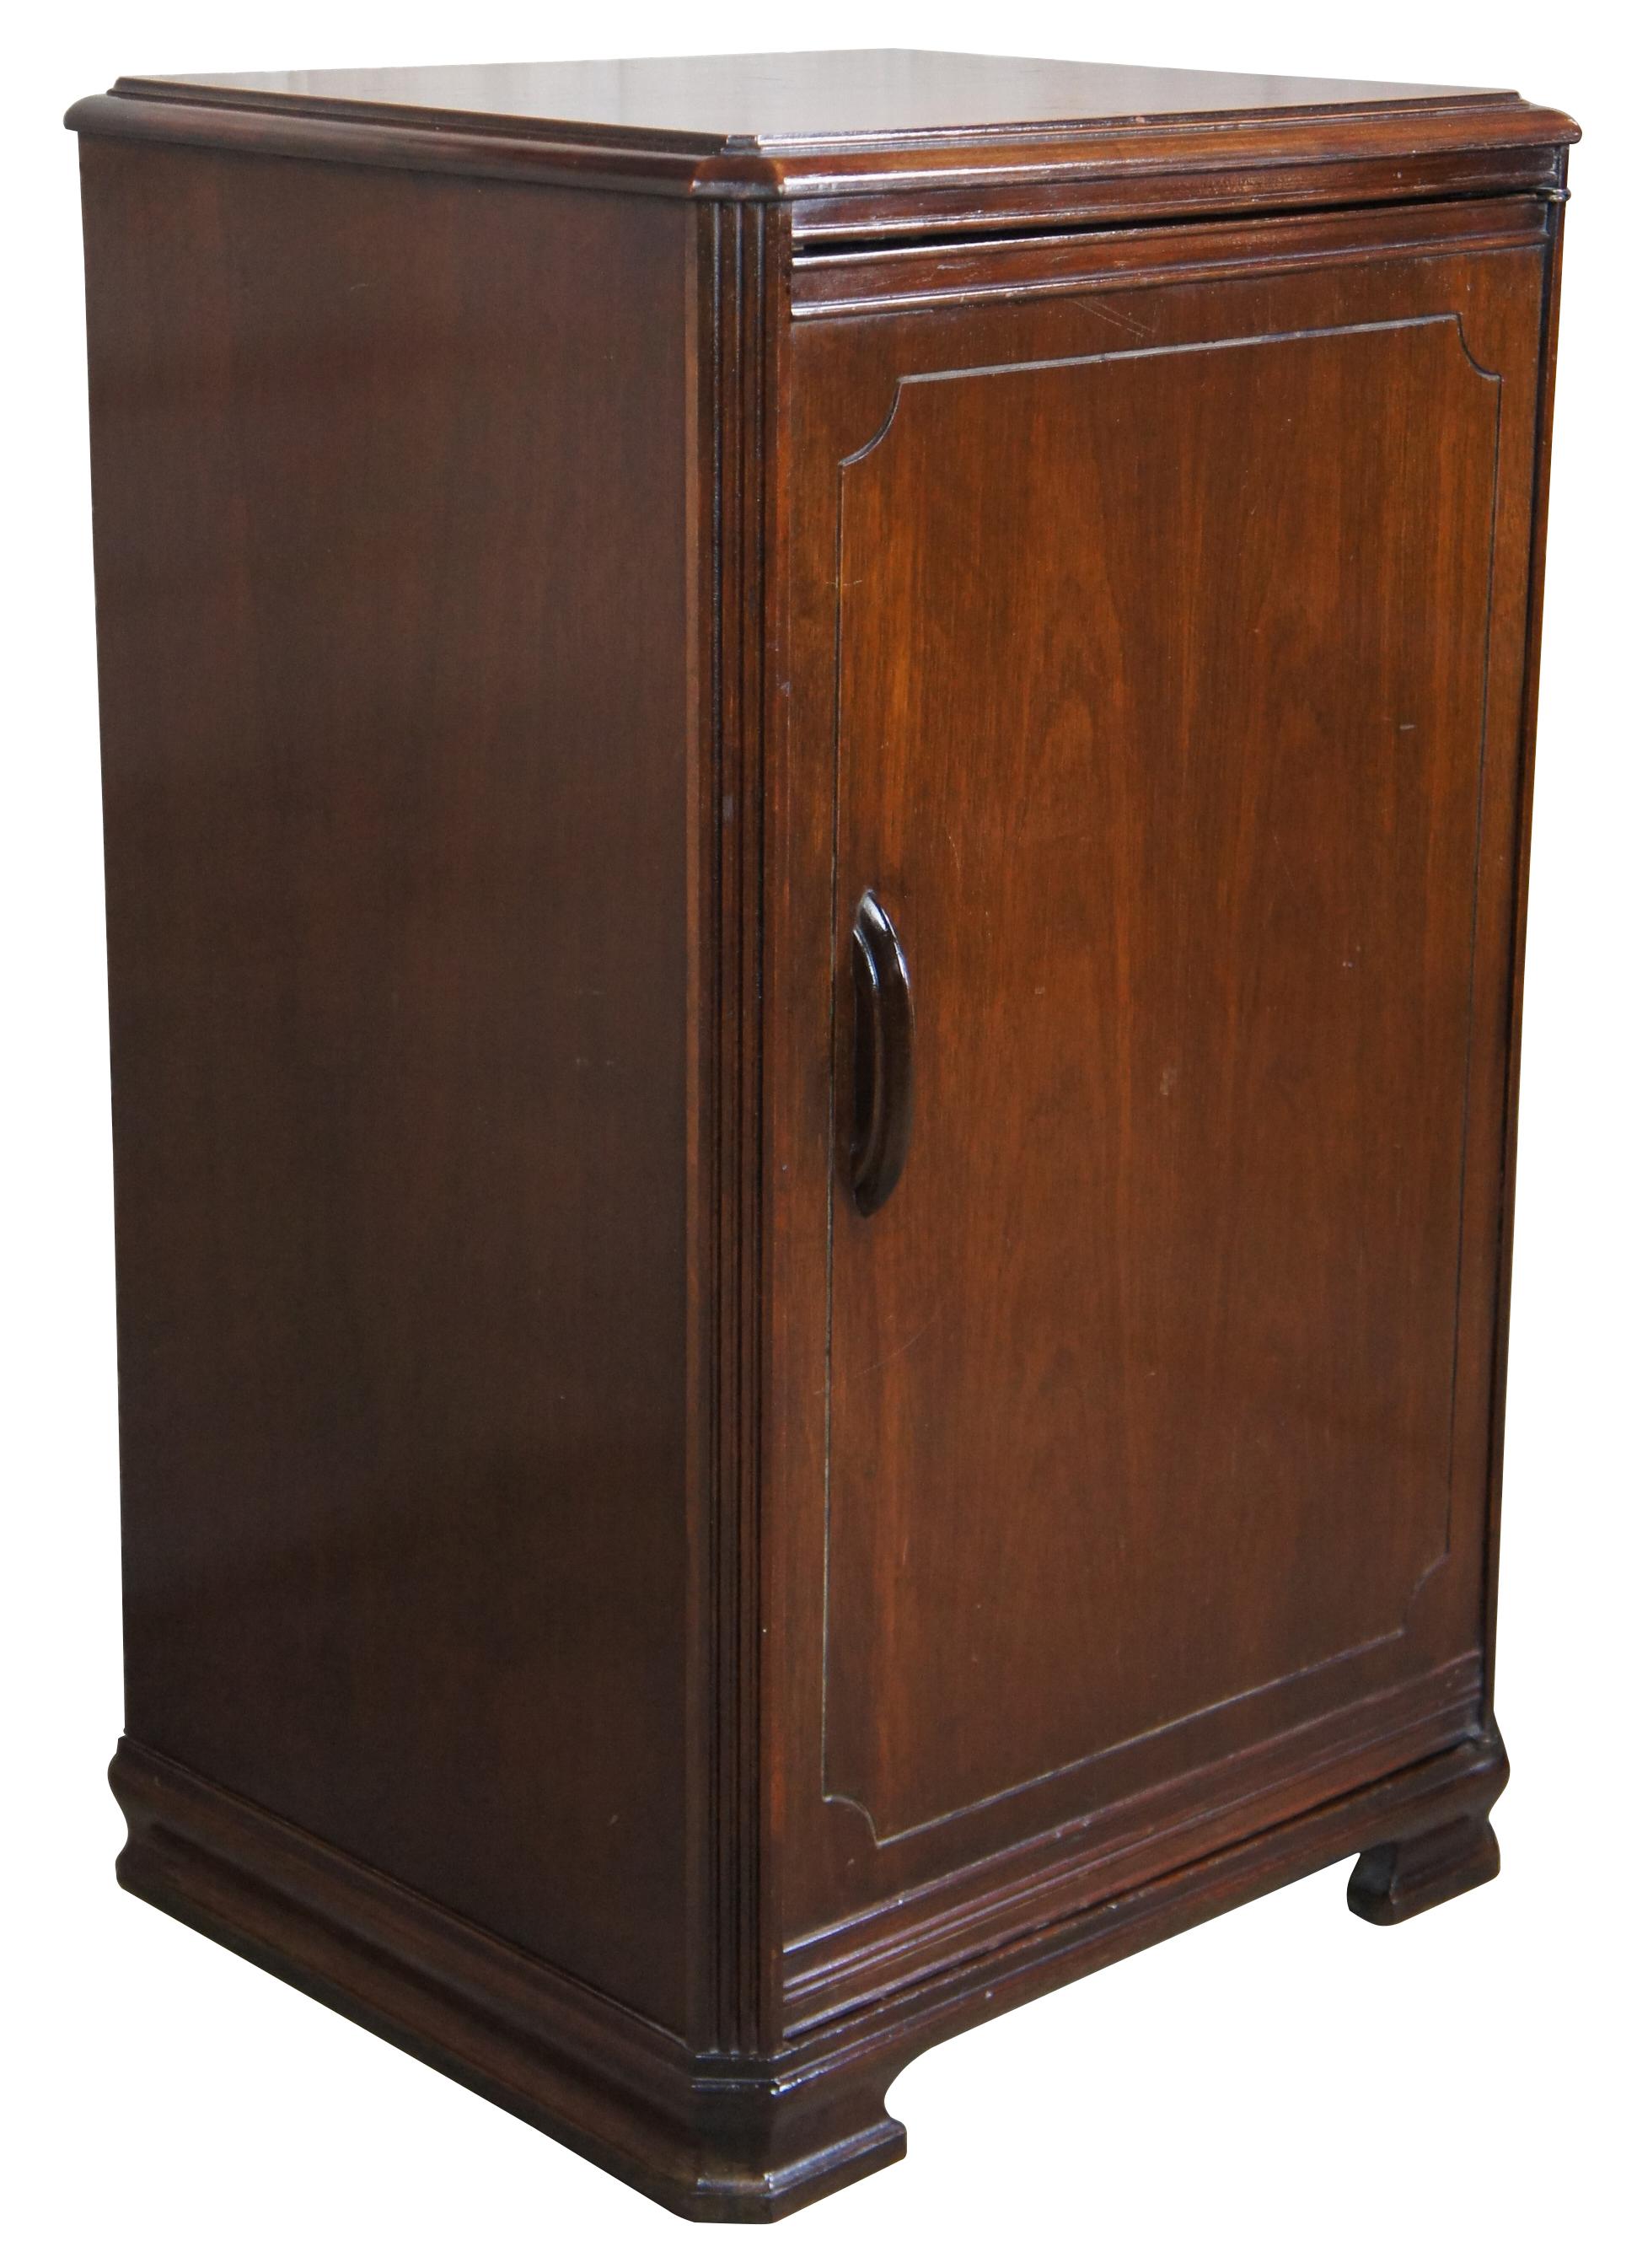 1940s Art Deco Continental custom built cabinets pedestal record cabinet. Made of mahogany featuring fluted sides, bracket feet and divided interior shelves. Measure: 32